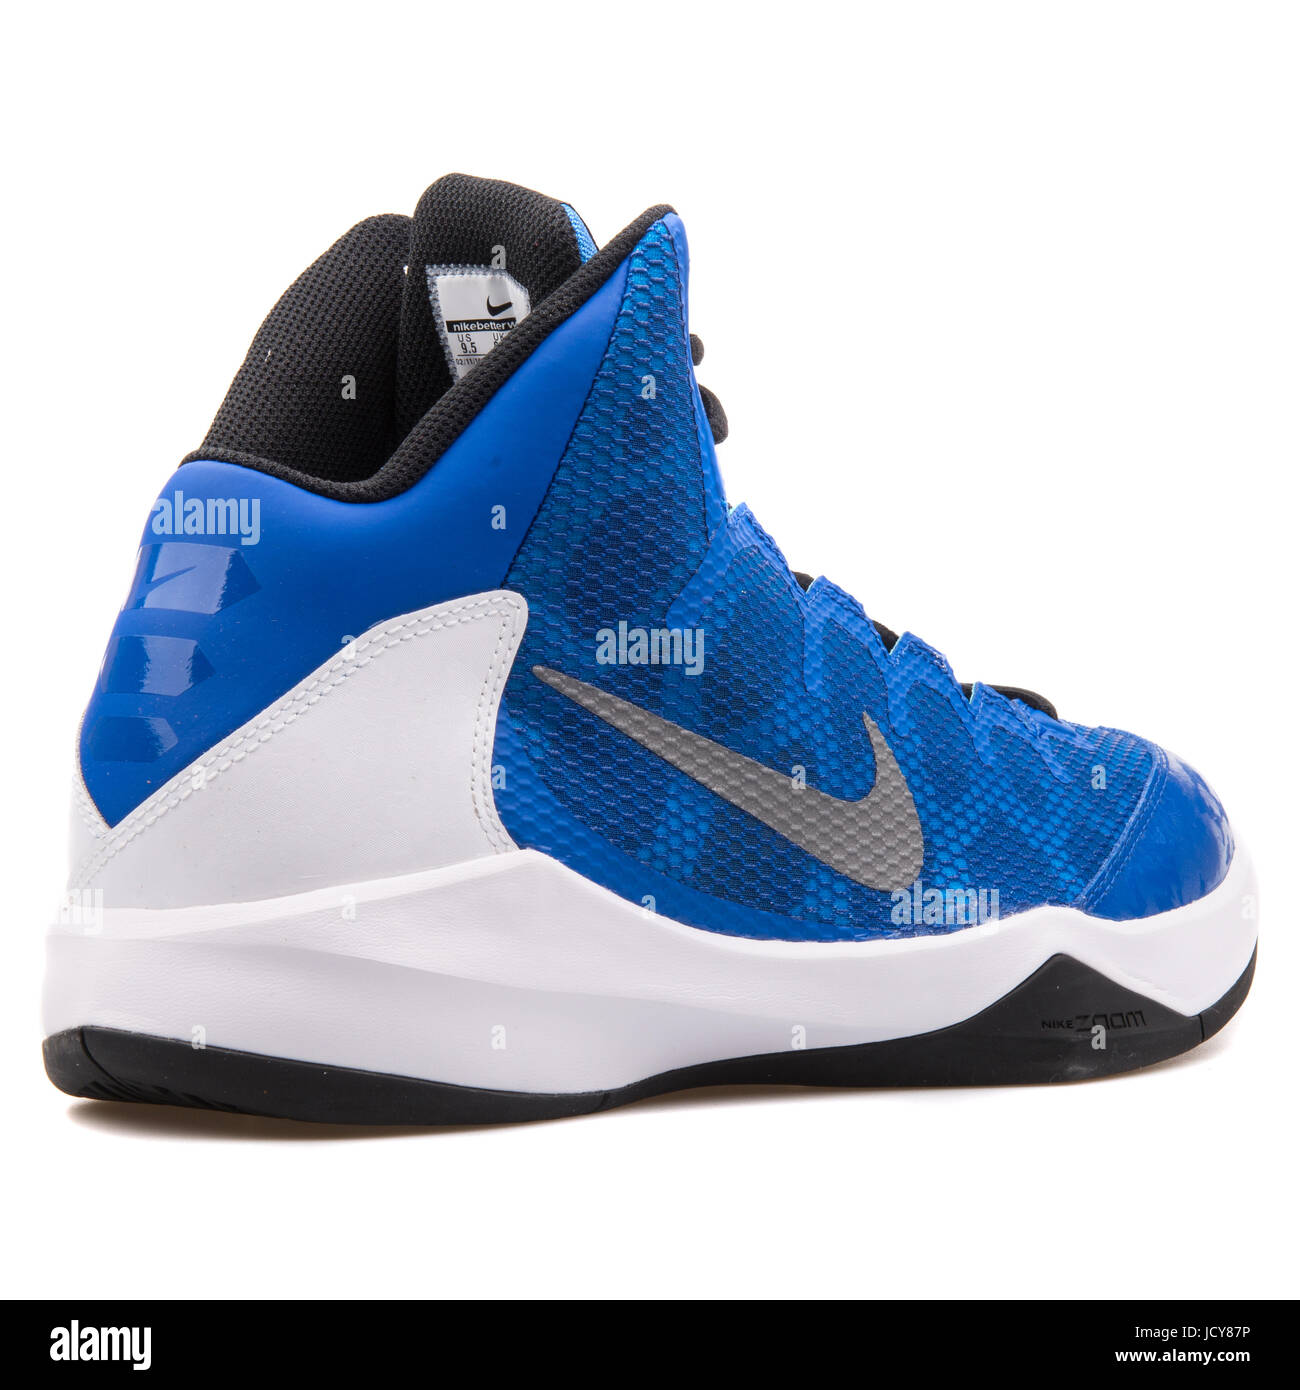 Coherent freedom Locomotive Nike Zoom Without A Doubt Royal Blue and White Men's Basketball Shoes -  749432-401 Stock Photo - Alamy